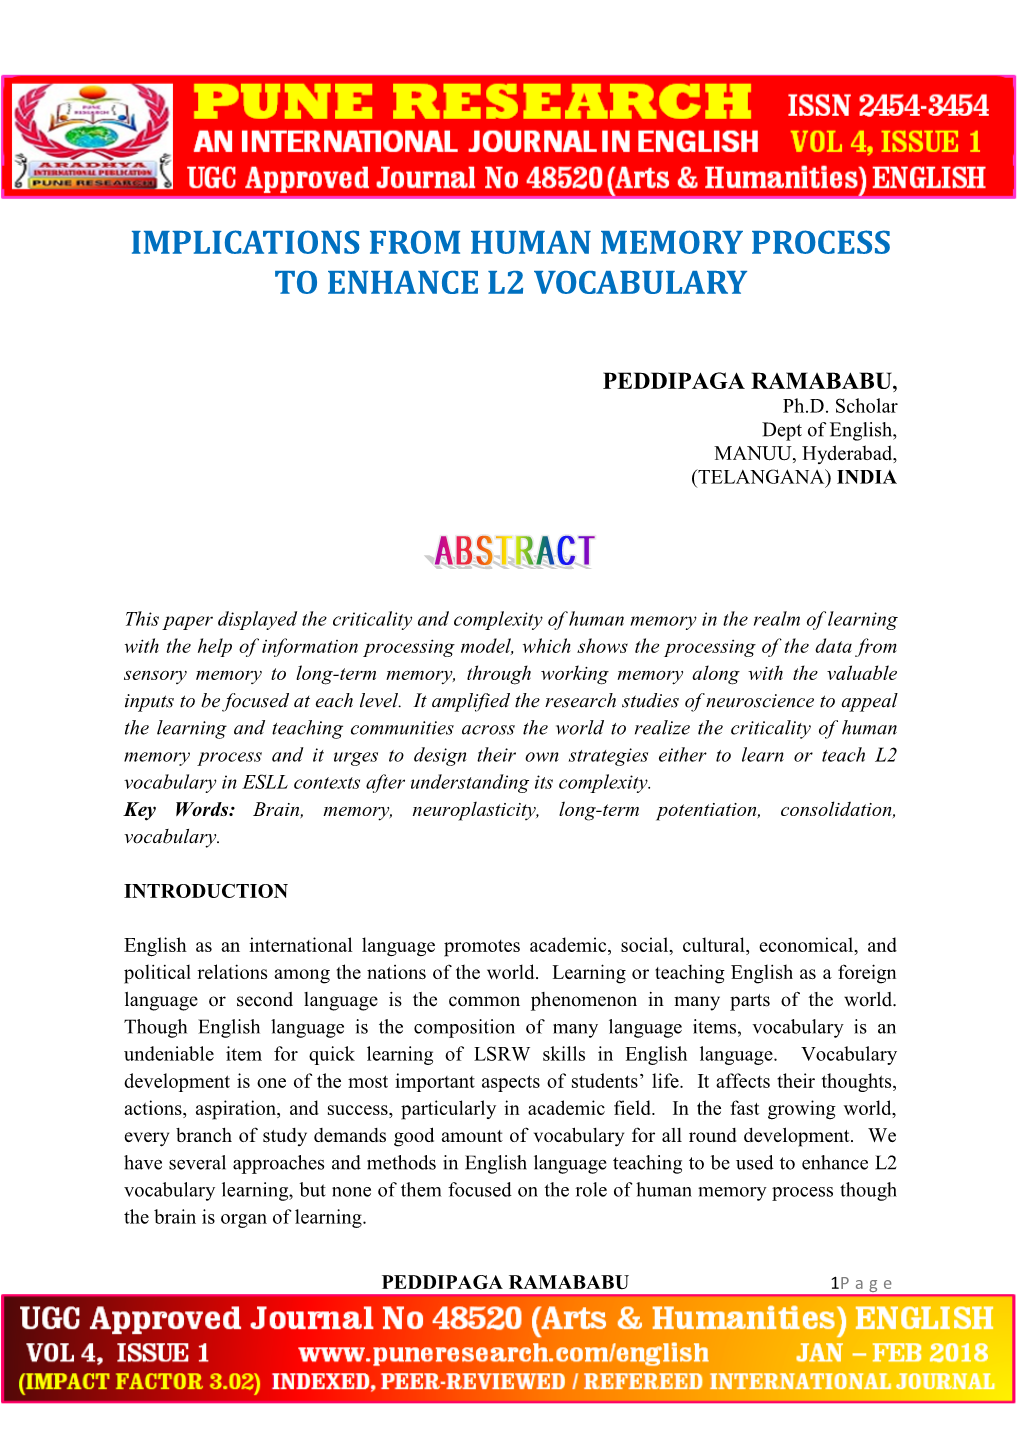 Implications from Human Memory Process to Enhance L2 Vocabulary